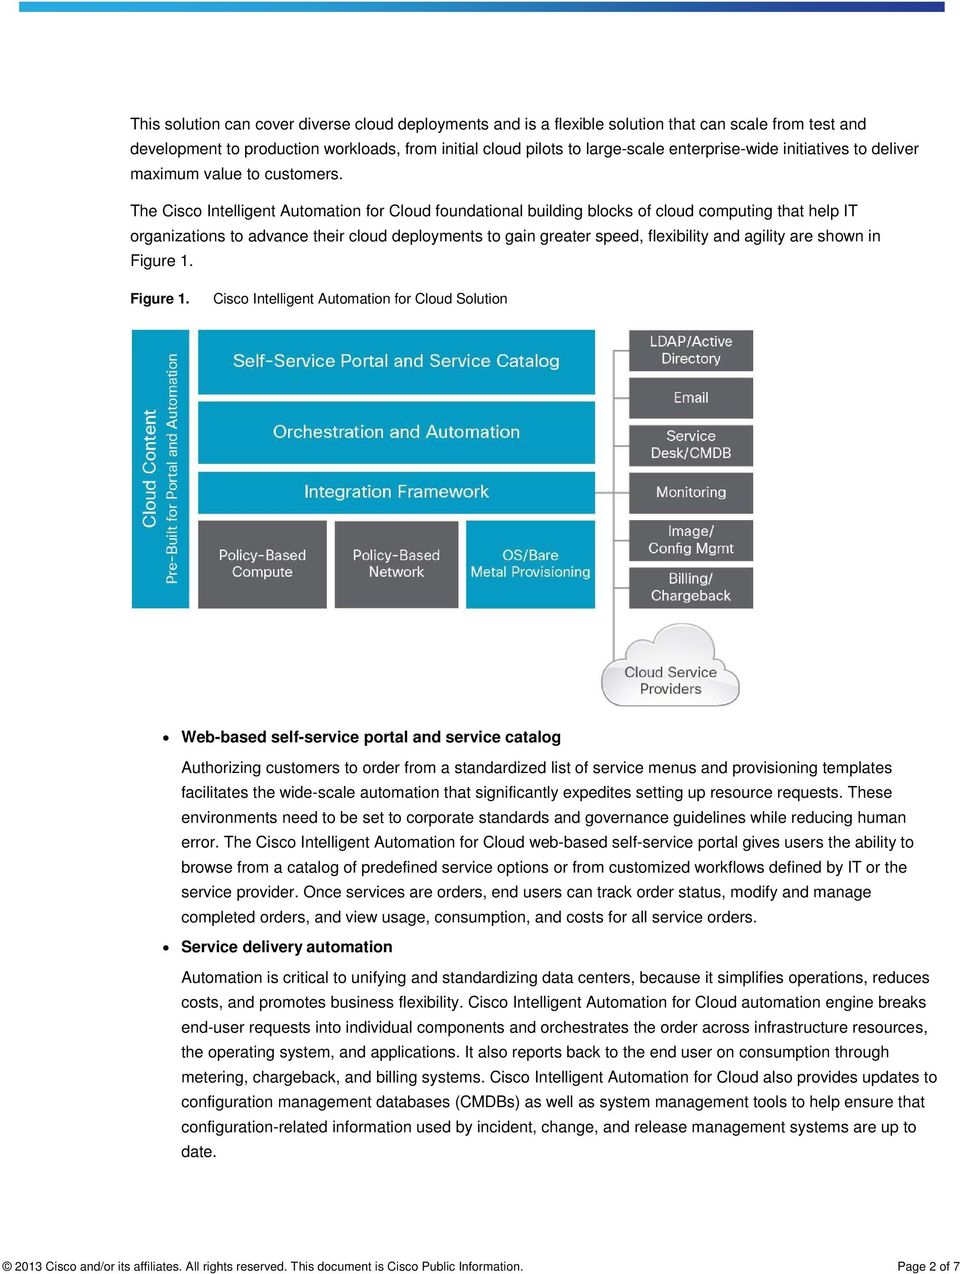 The Cisco Intelligent Automation for Cloud foundational building blocks of cloud computing that help IT organizations to advance their cloud deployments to gain greater speed, flexibility and agility